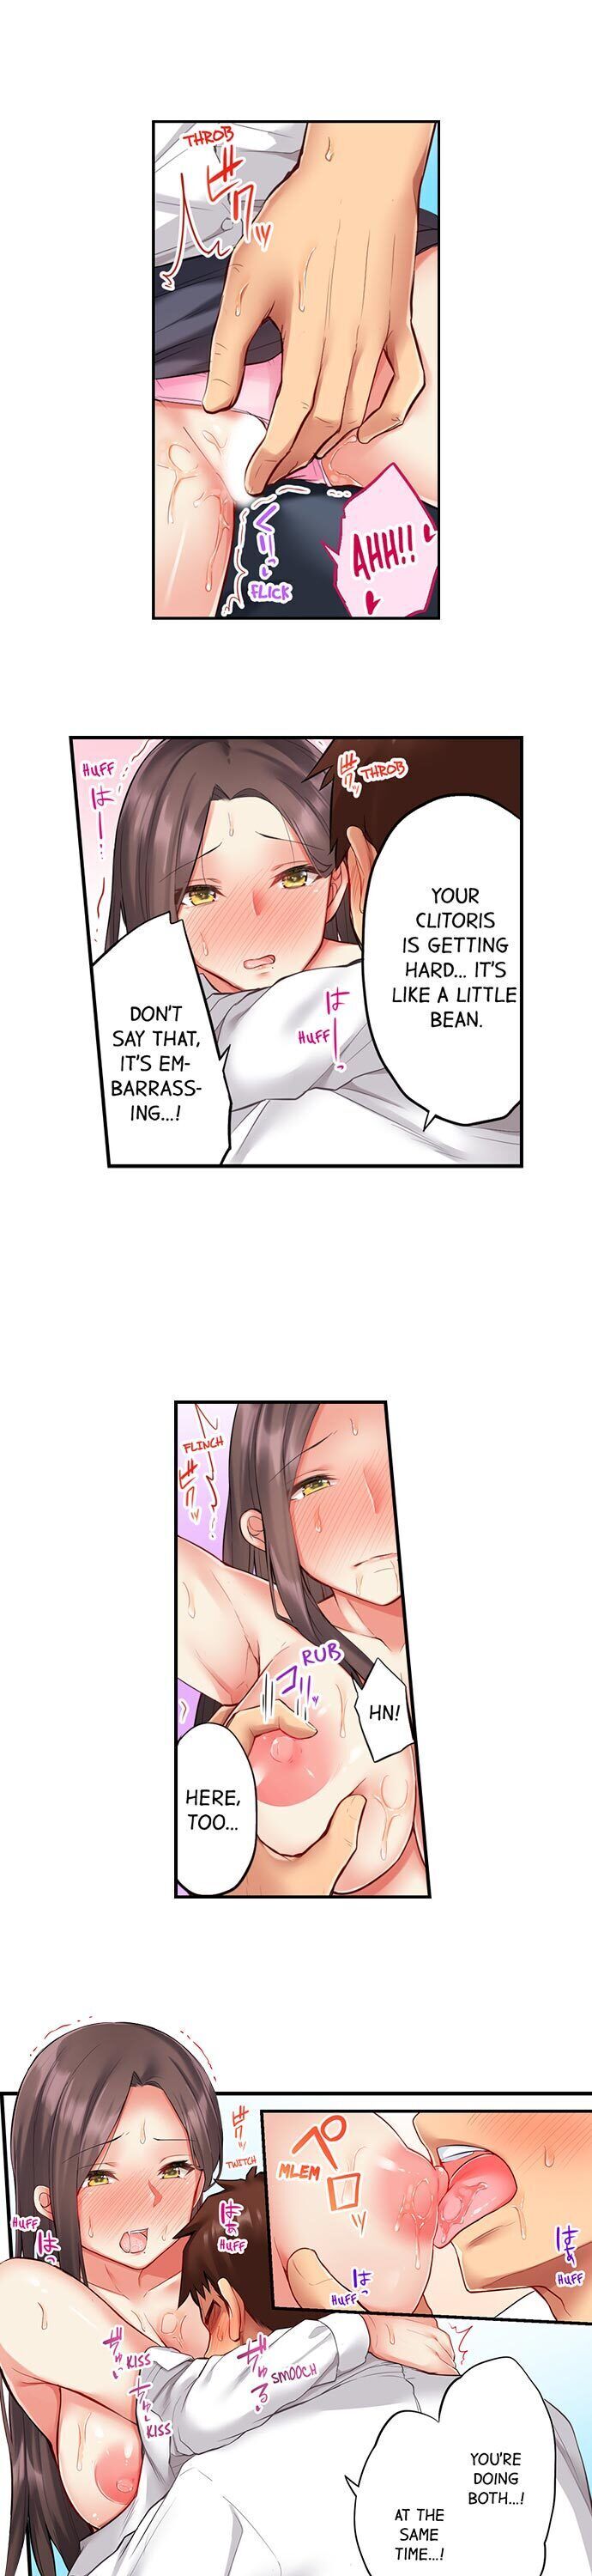 If I See Your Boobs, There’s No Way I Won’t Lick Them… - Chapter 6 Page 4